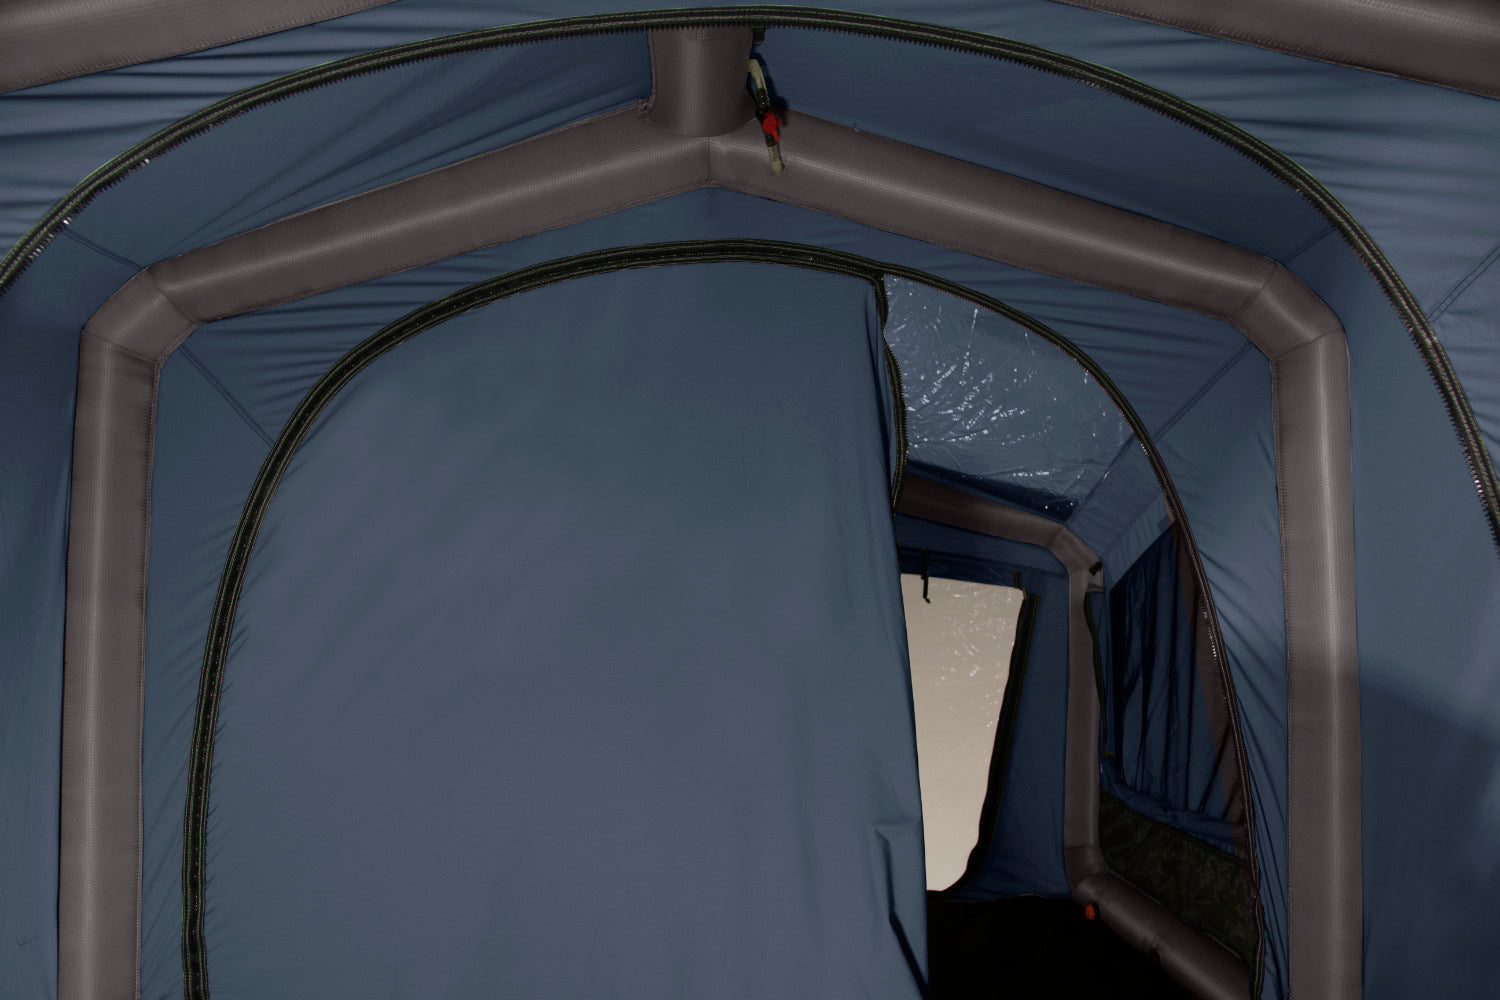 The interior wall is half zipped shut showing how the tent can turn into 2 separate rooms.